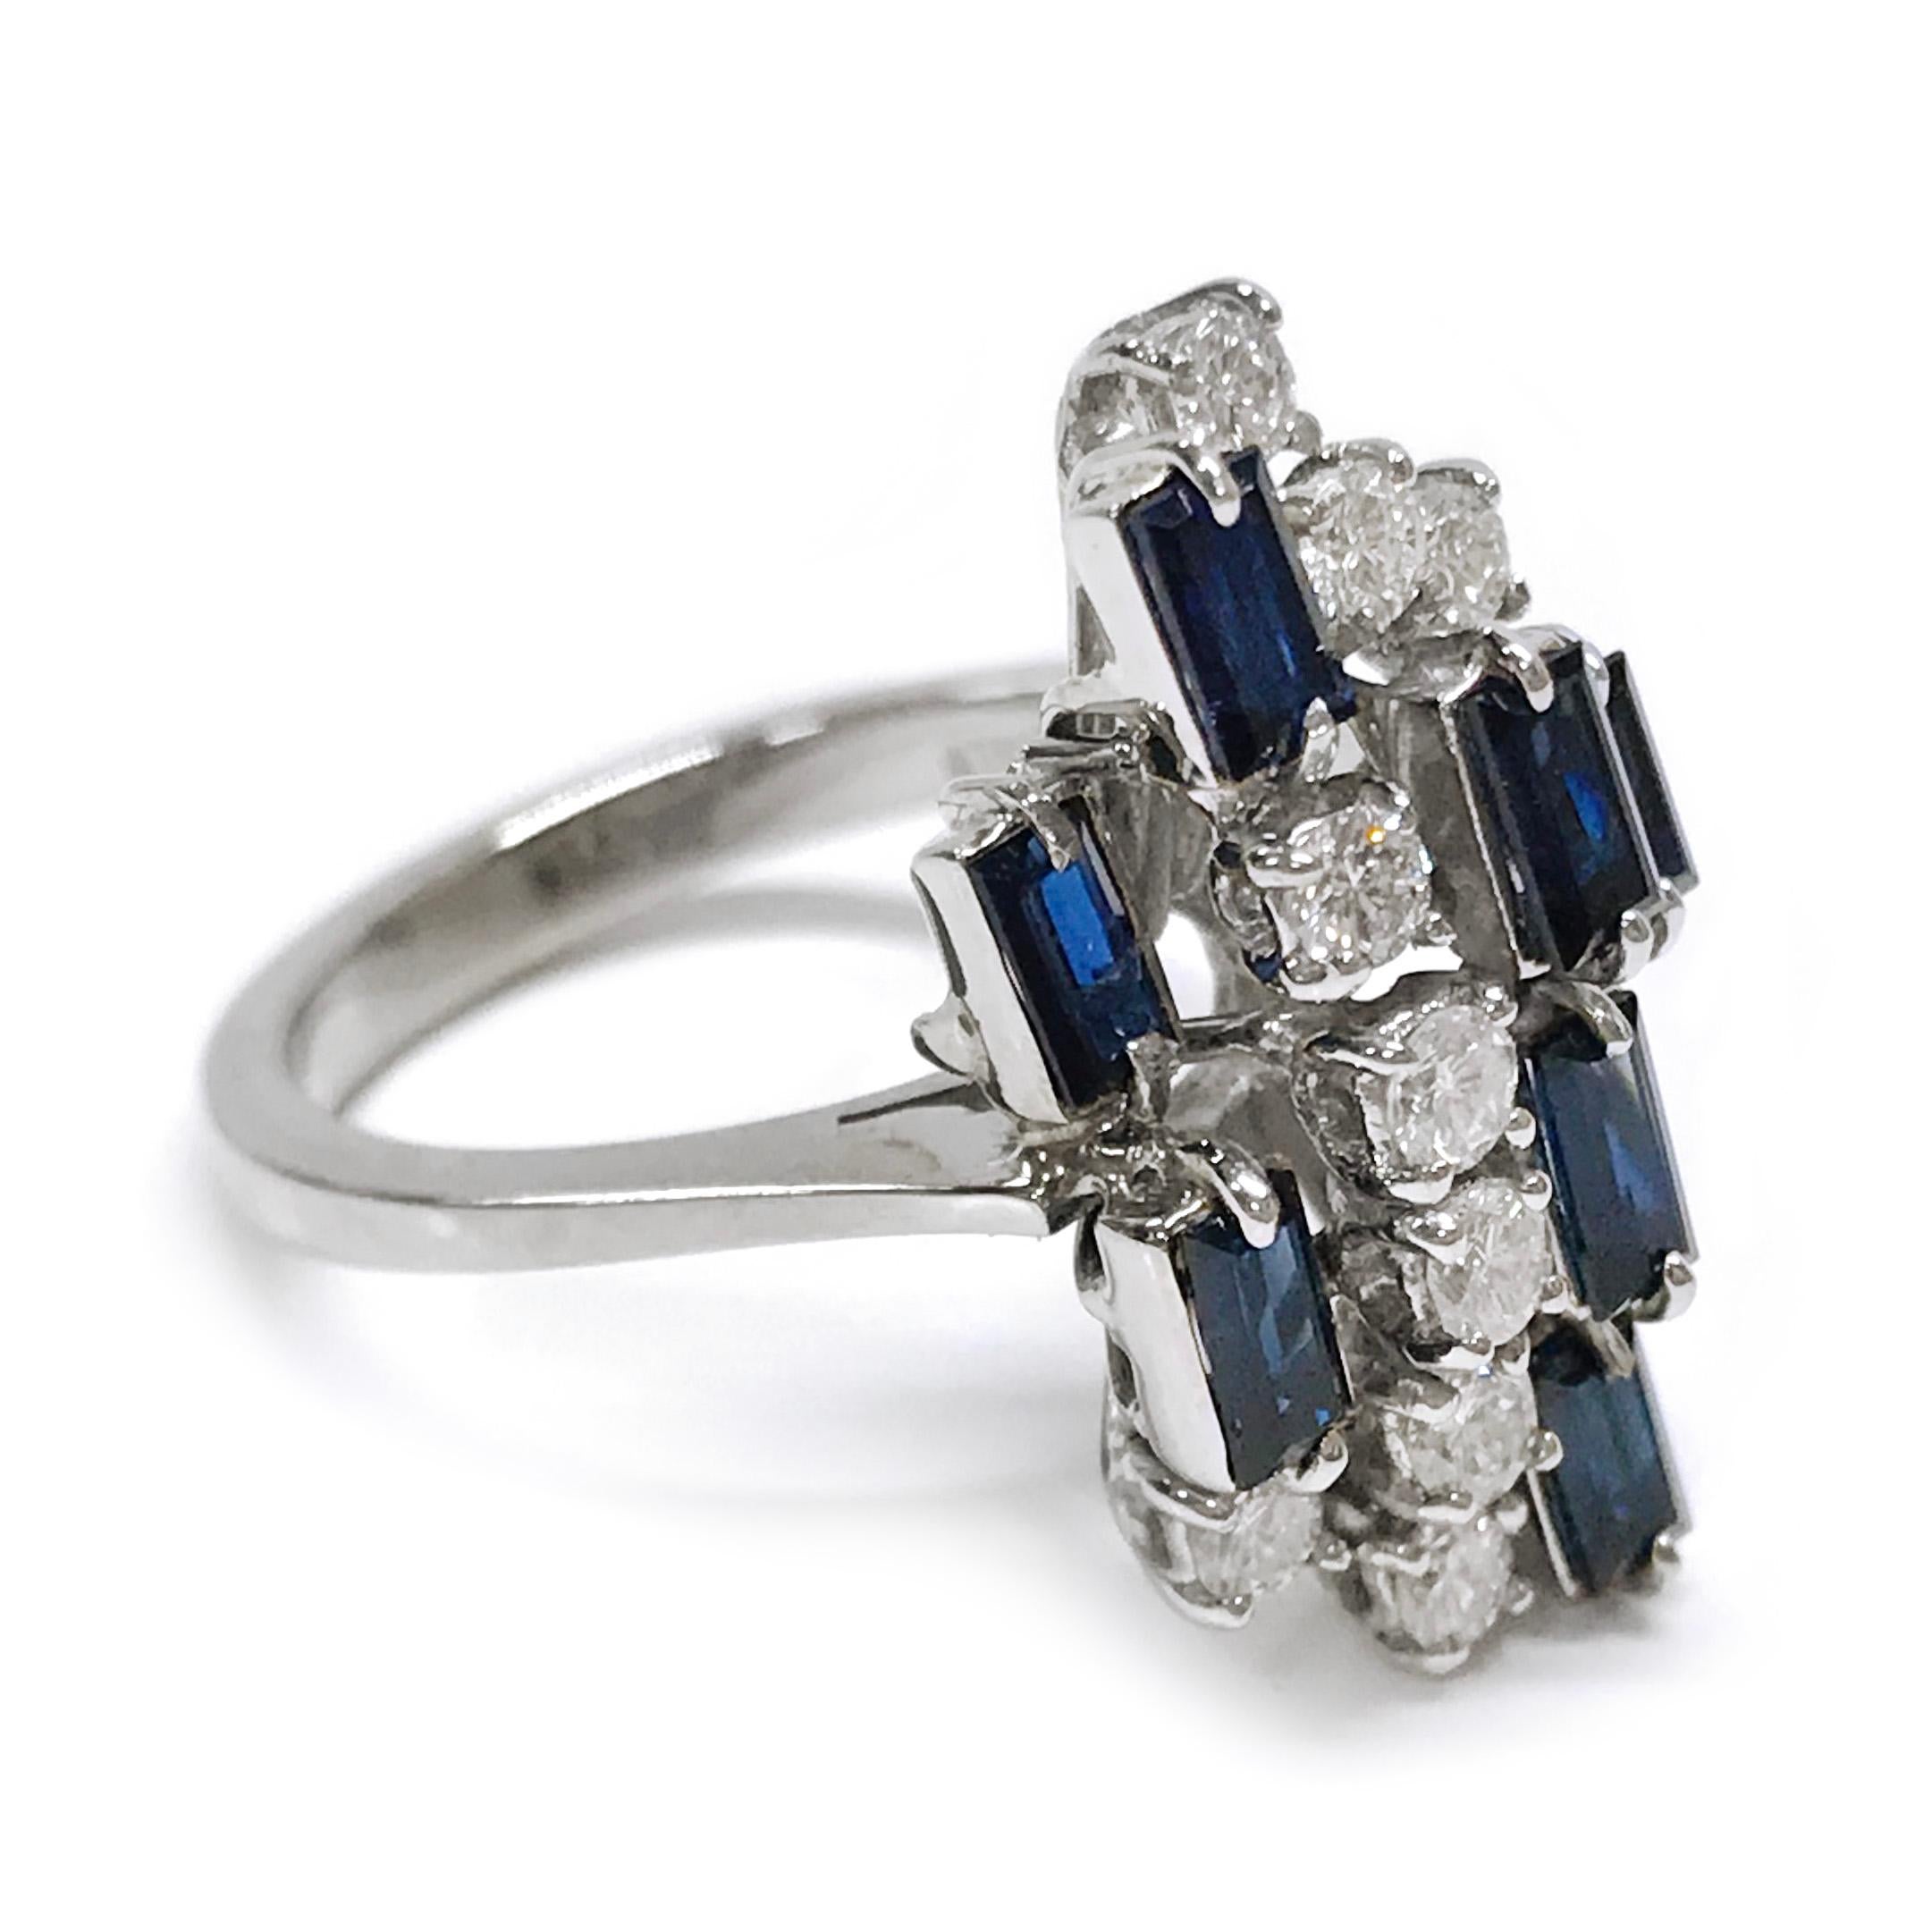 18 Karat Diamond Blue Sapphire Emerald-Cut Ring. The cluster ring features nine round diamonds and eight emerald-cut blue sapphires set in tiers of multiple heights. The sapphires are bezel-set and the diamonds are prong-set. The total carat weight